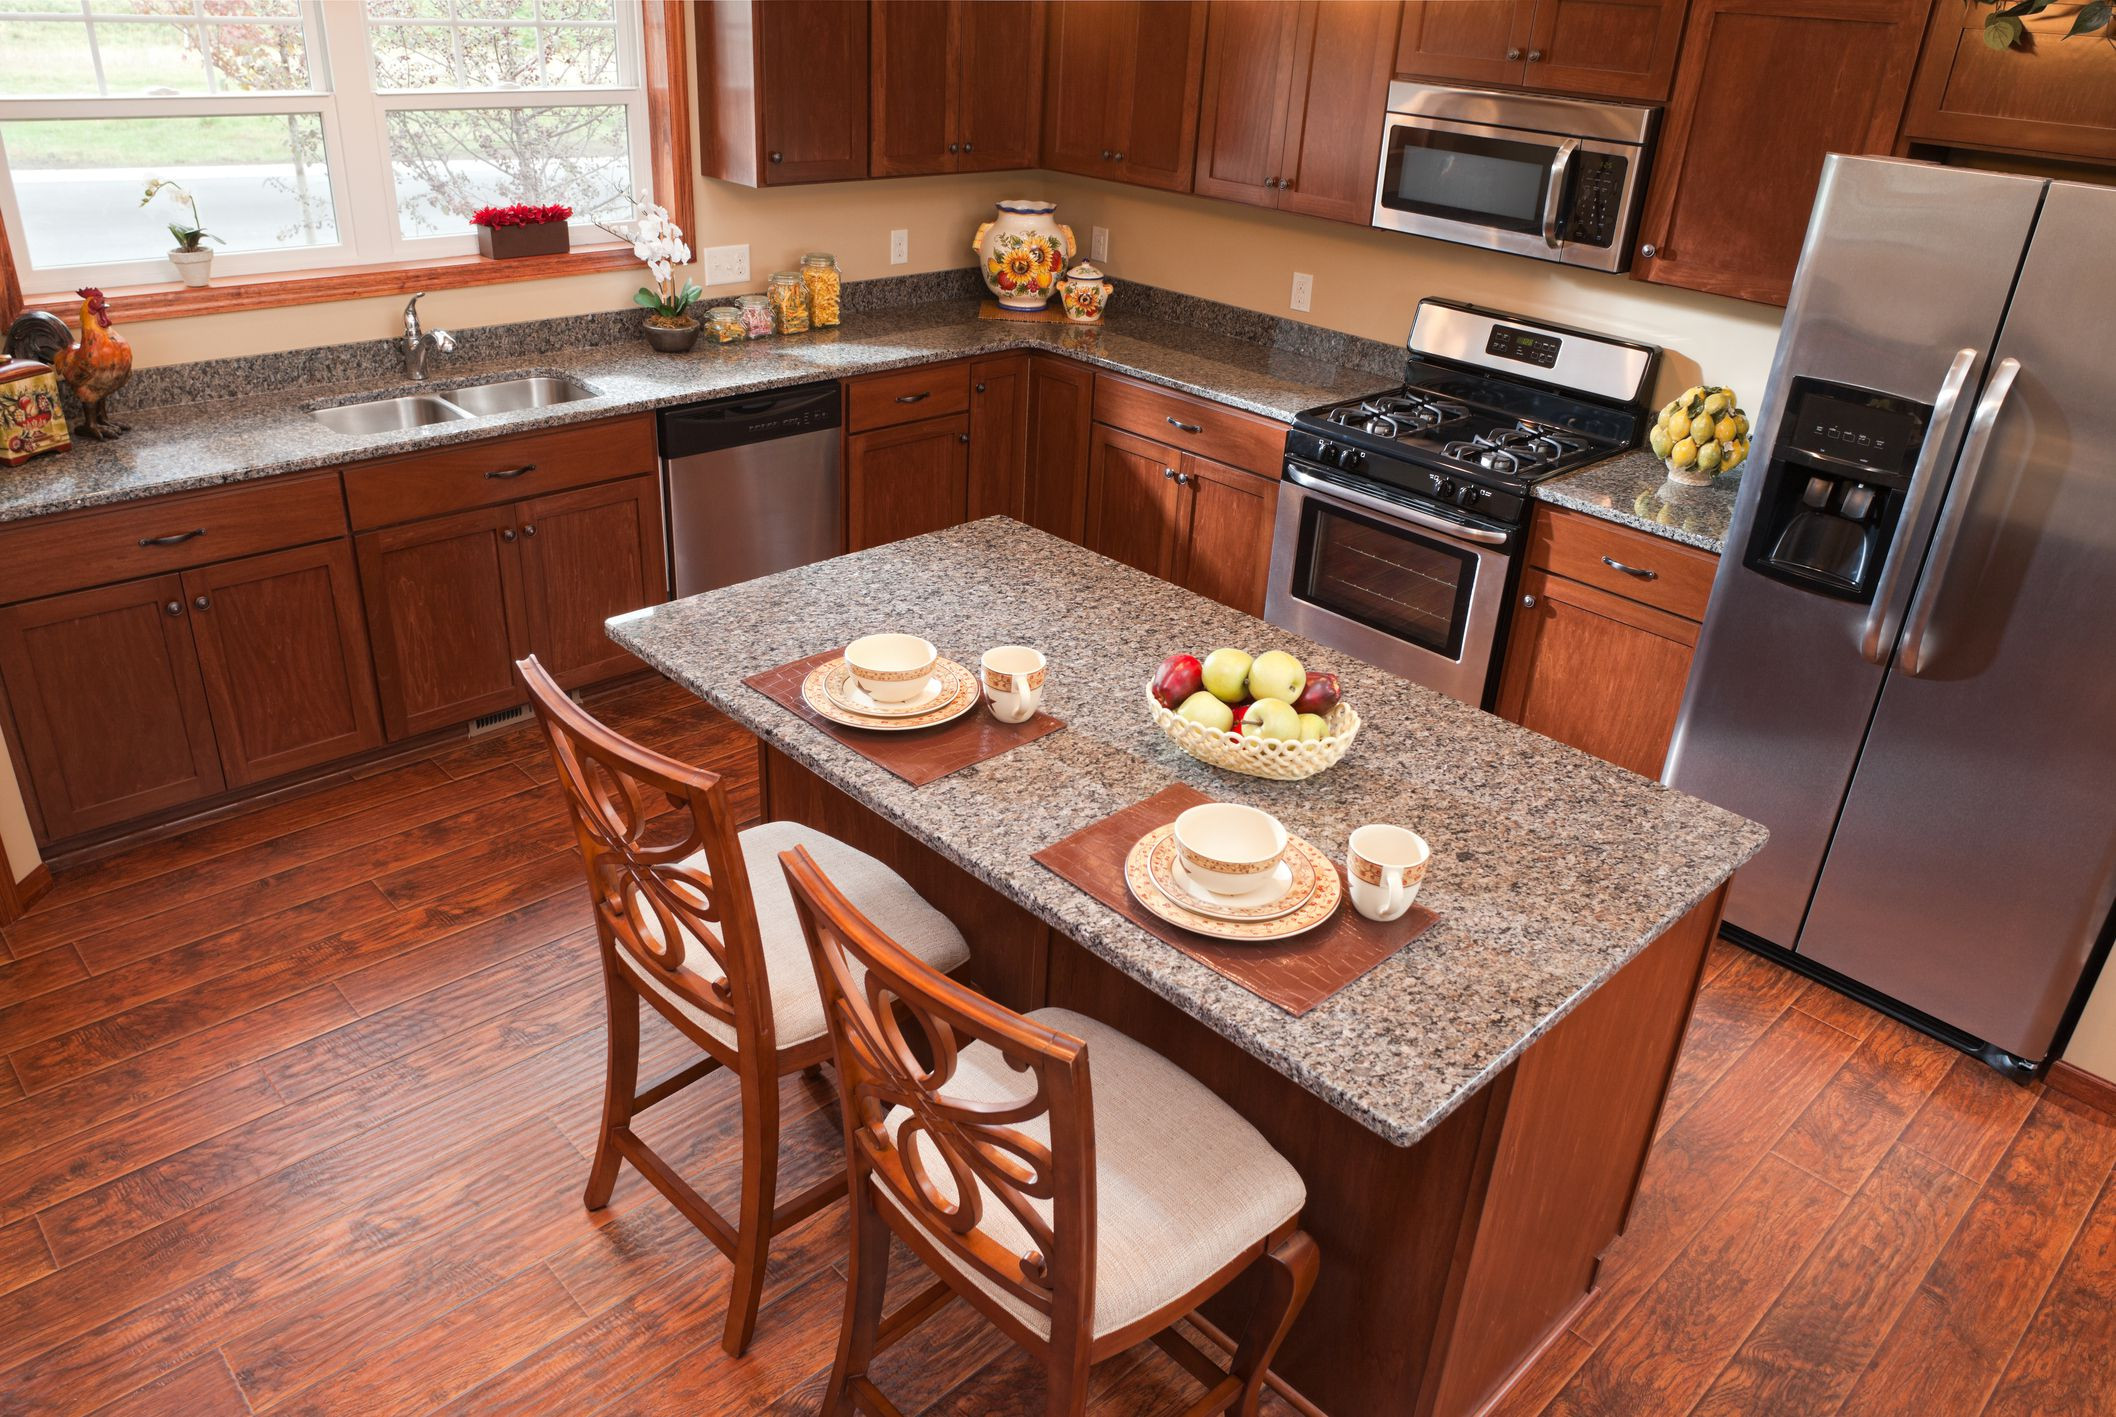 Laminate Floor For Kitchens
 Can You Install Laminate Flooring In The Kitchen